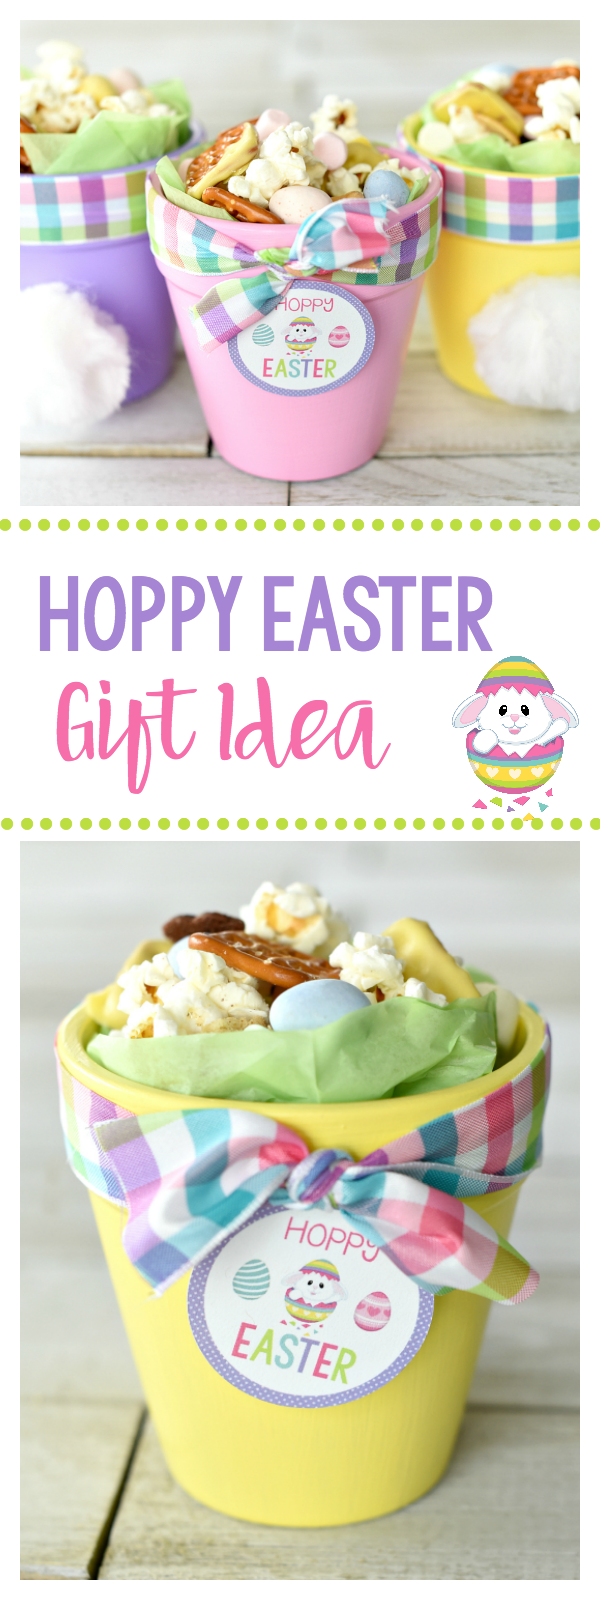 Cute Easter Gift-Bunny Pots Filled with a Fun Easter Snack Mix. This cute Easter craft idea is fun to do with the kids or to make as an Easter gift for friends! Plus the snack mix tastes amazing! #easter #snacks #crafts #eastercrafts